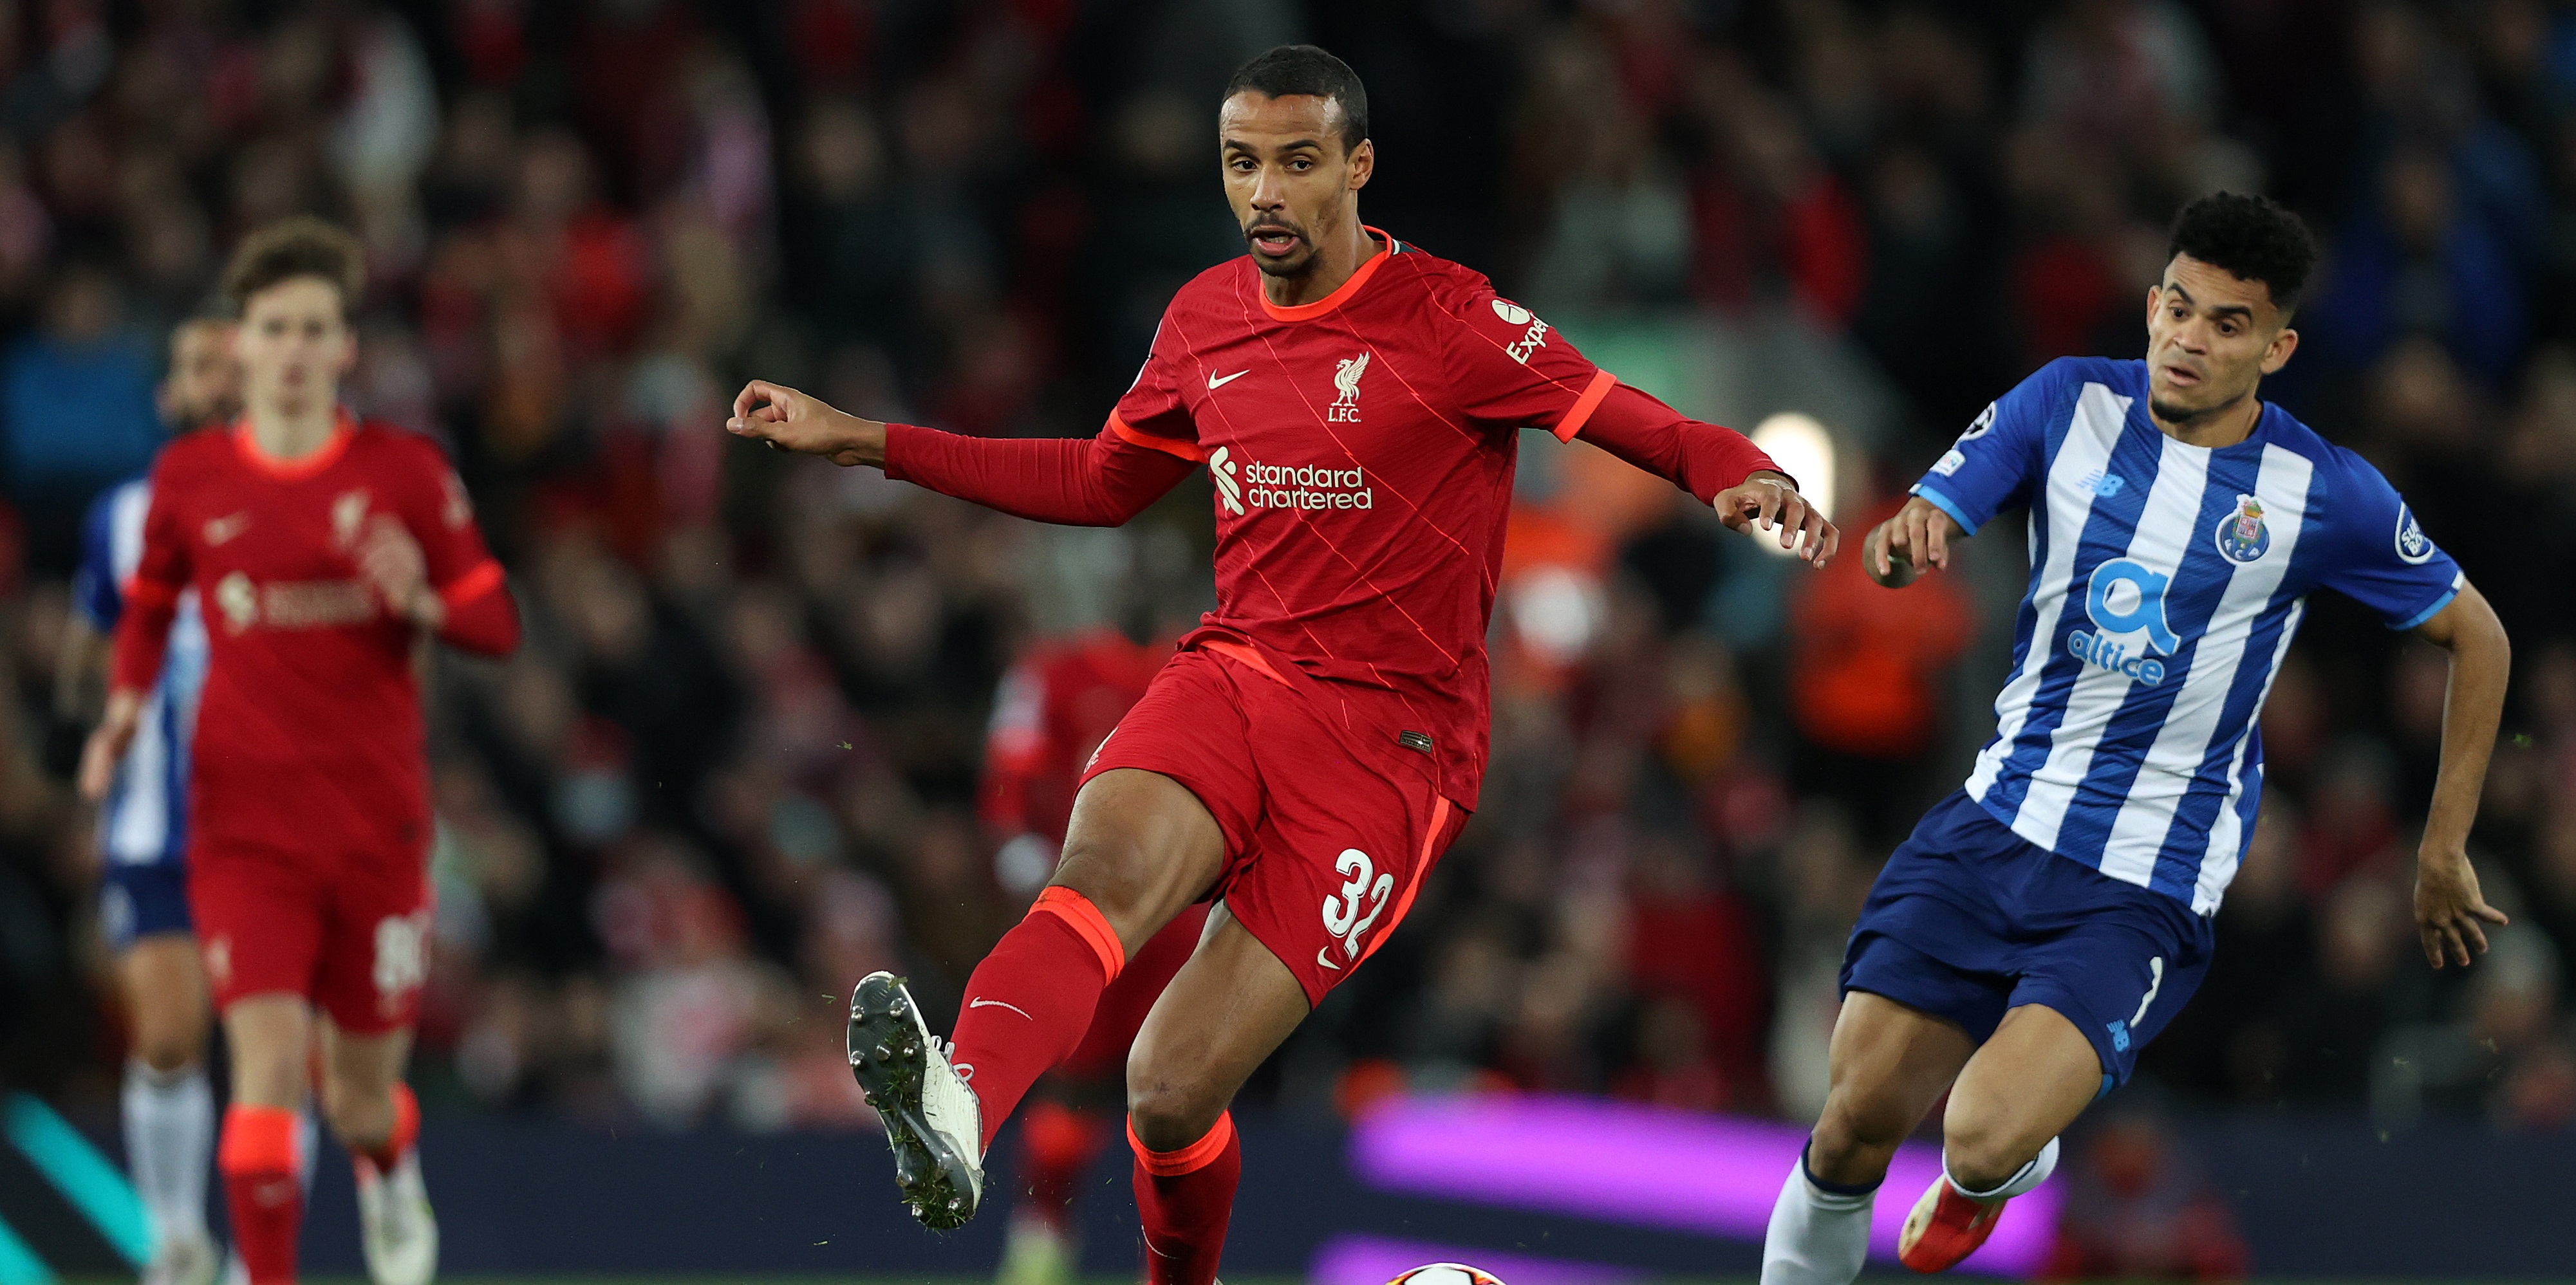 ‘I’m quite confident’ – Joel Matip on the Carabao Cup final and Liverpool’s chances of winning